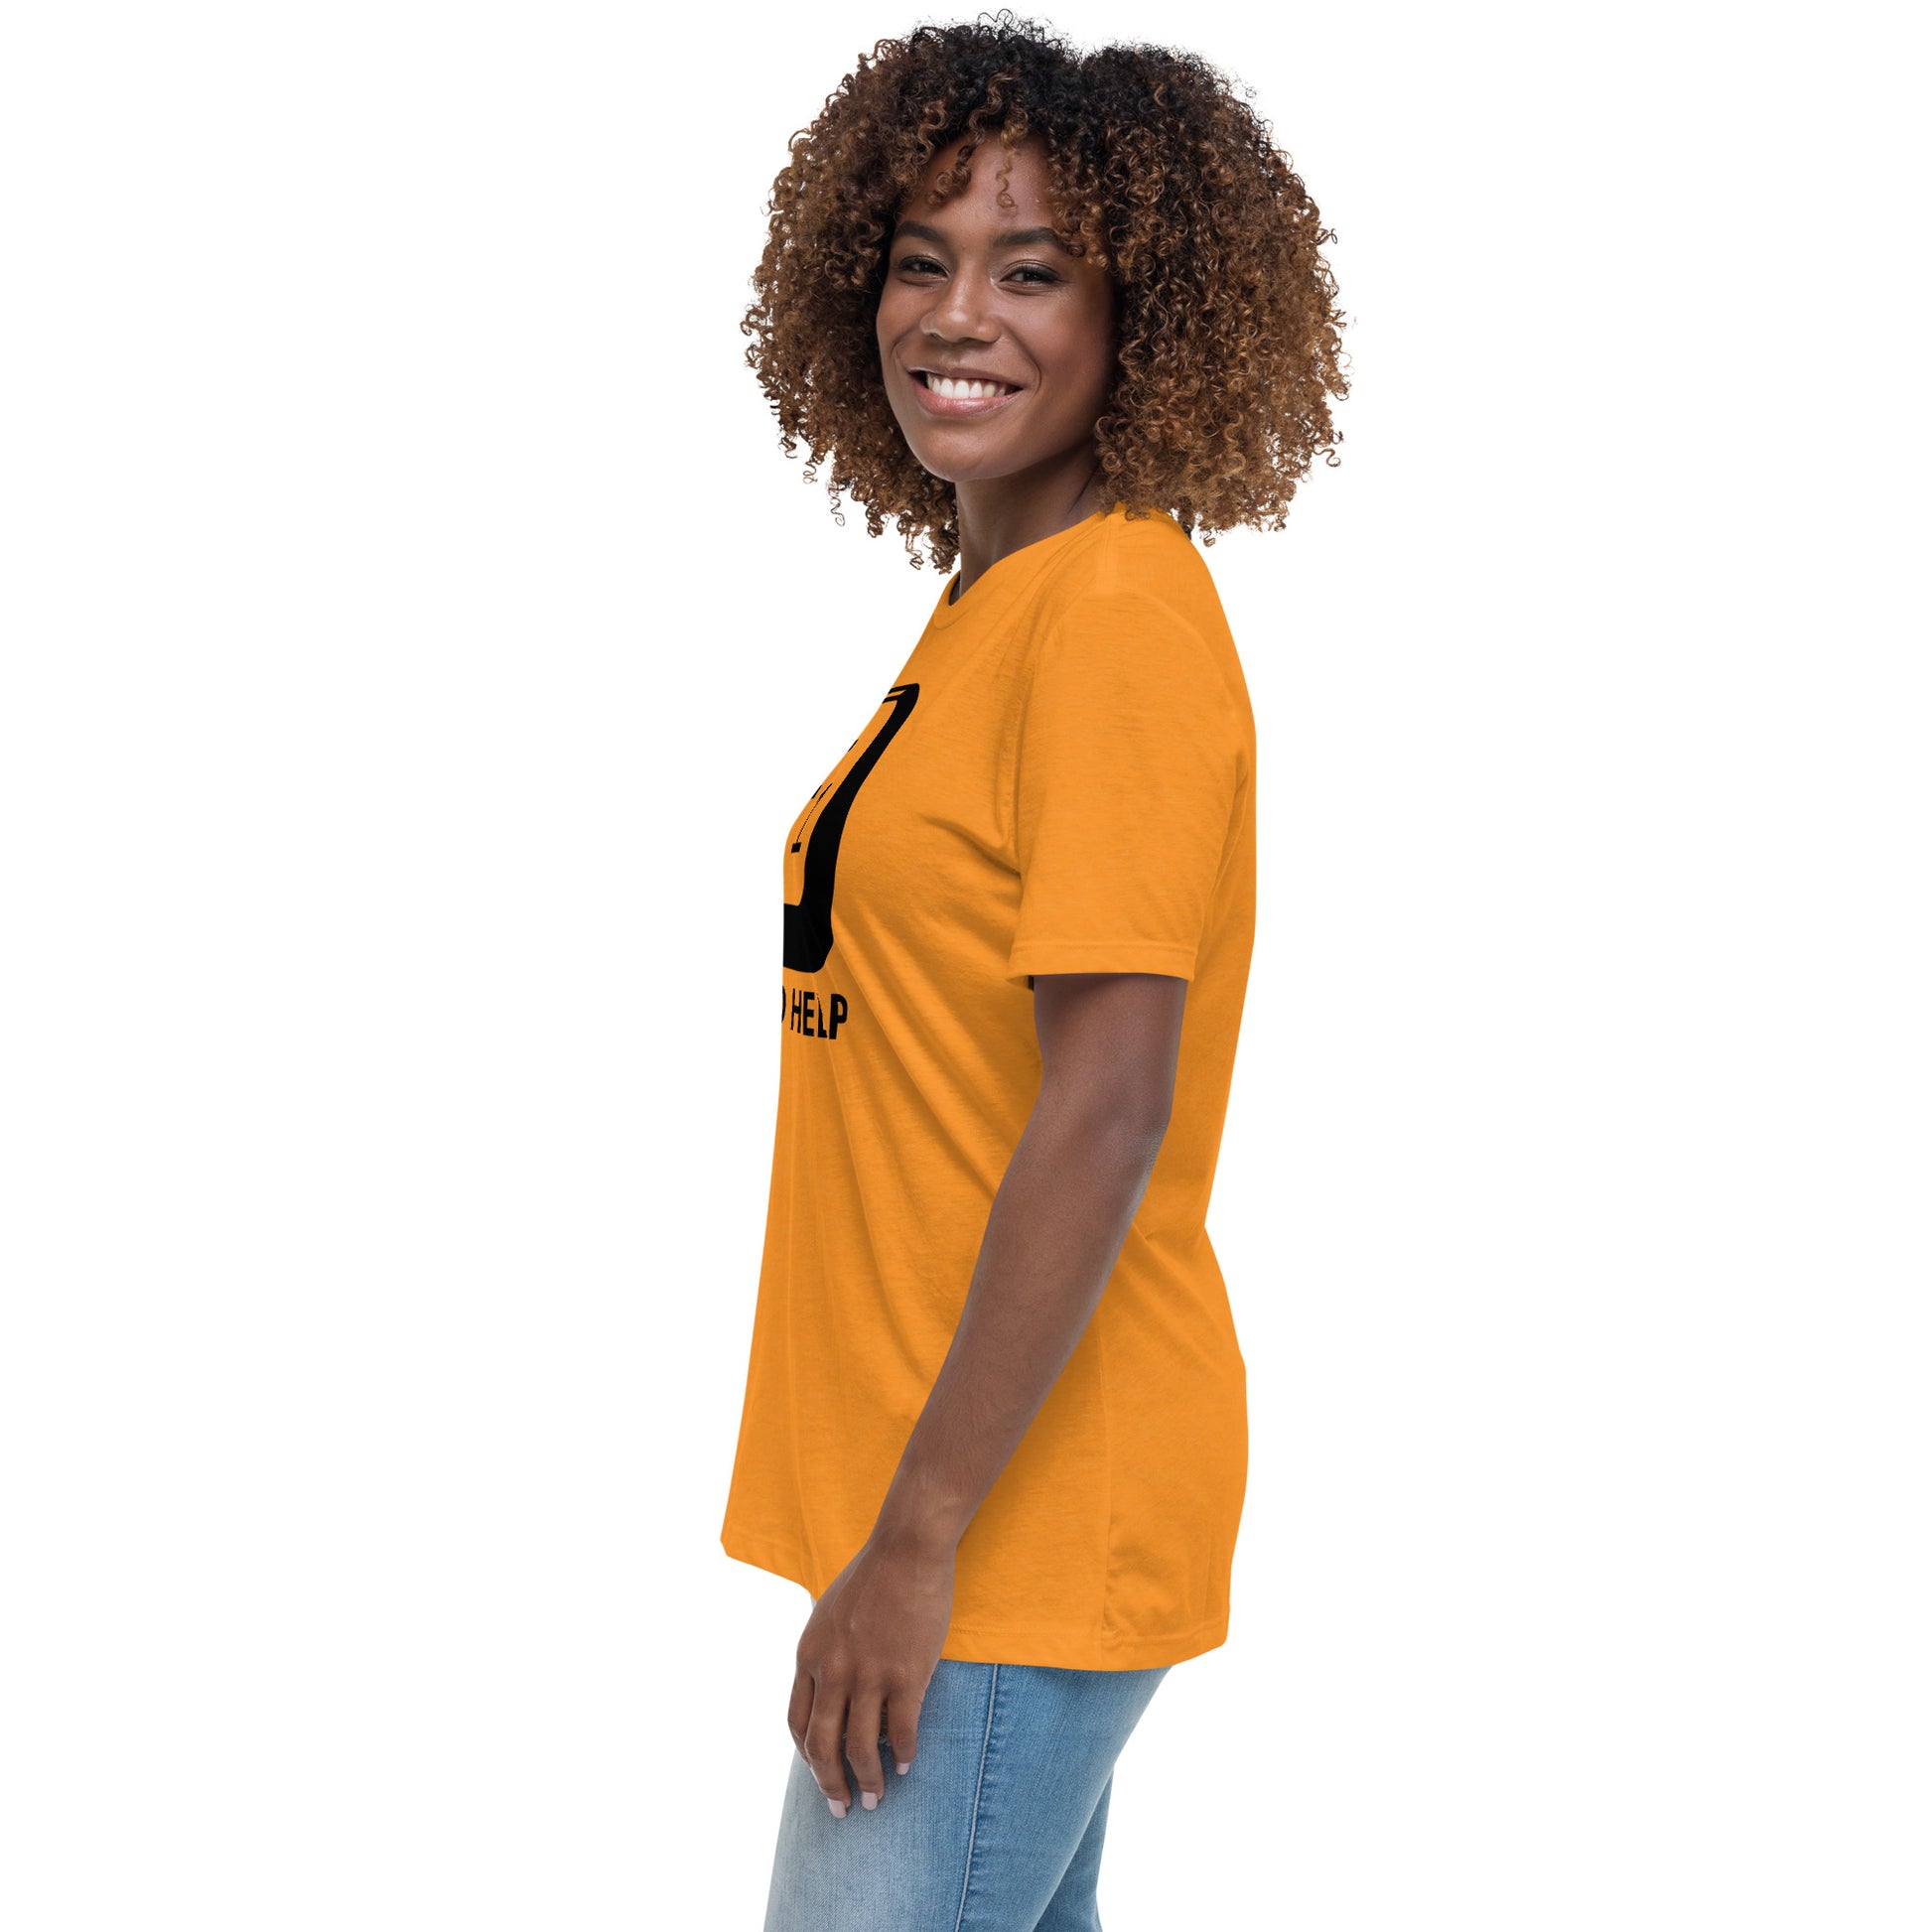 Woman with marmalade t-shirt with picture of "F1" key and text "I need help"